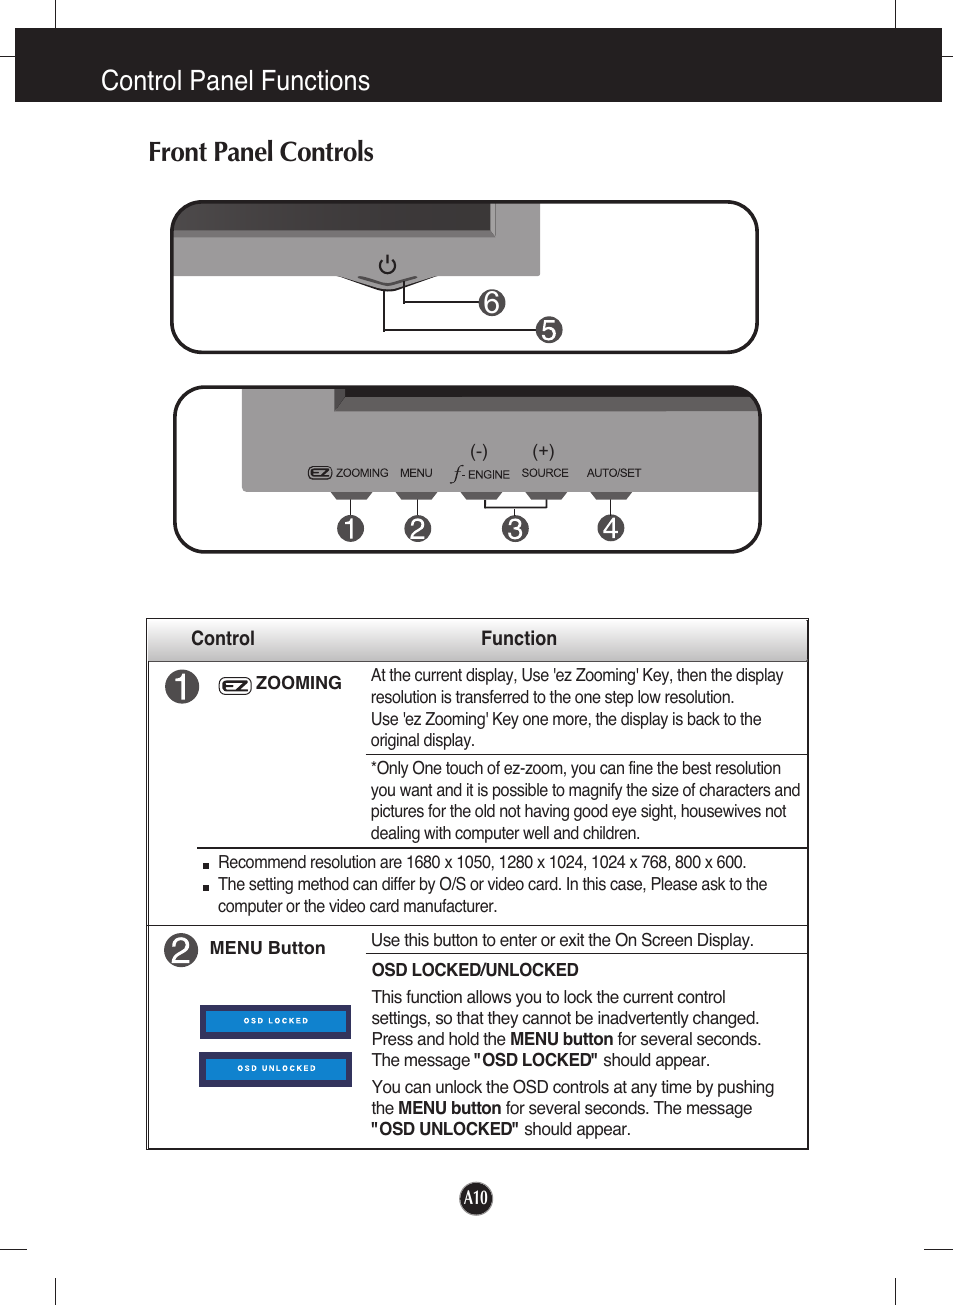 Control panel functions, Front panel controls | LG L226WTQ-WF User Manual | Page 11 / 26